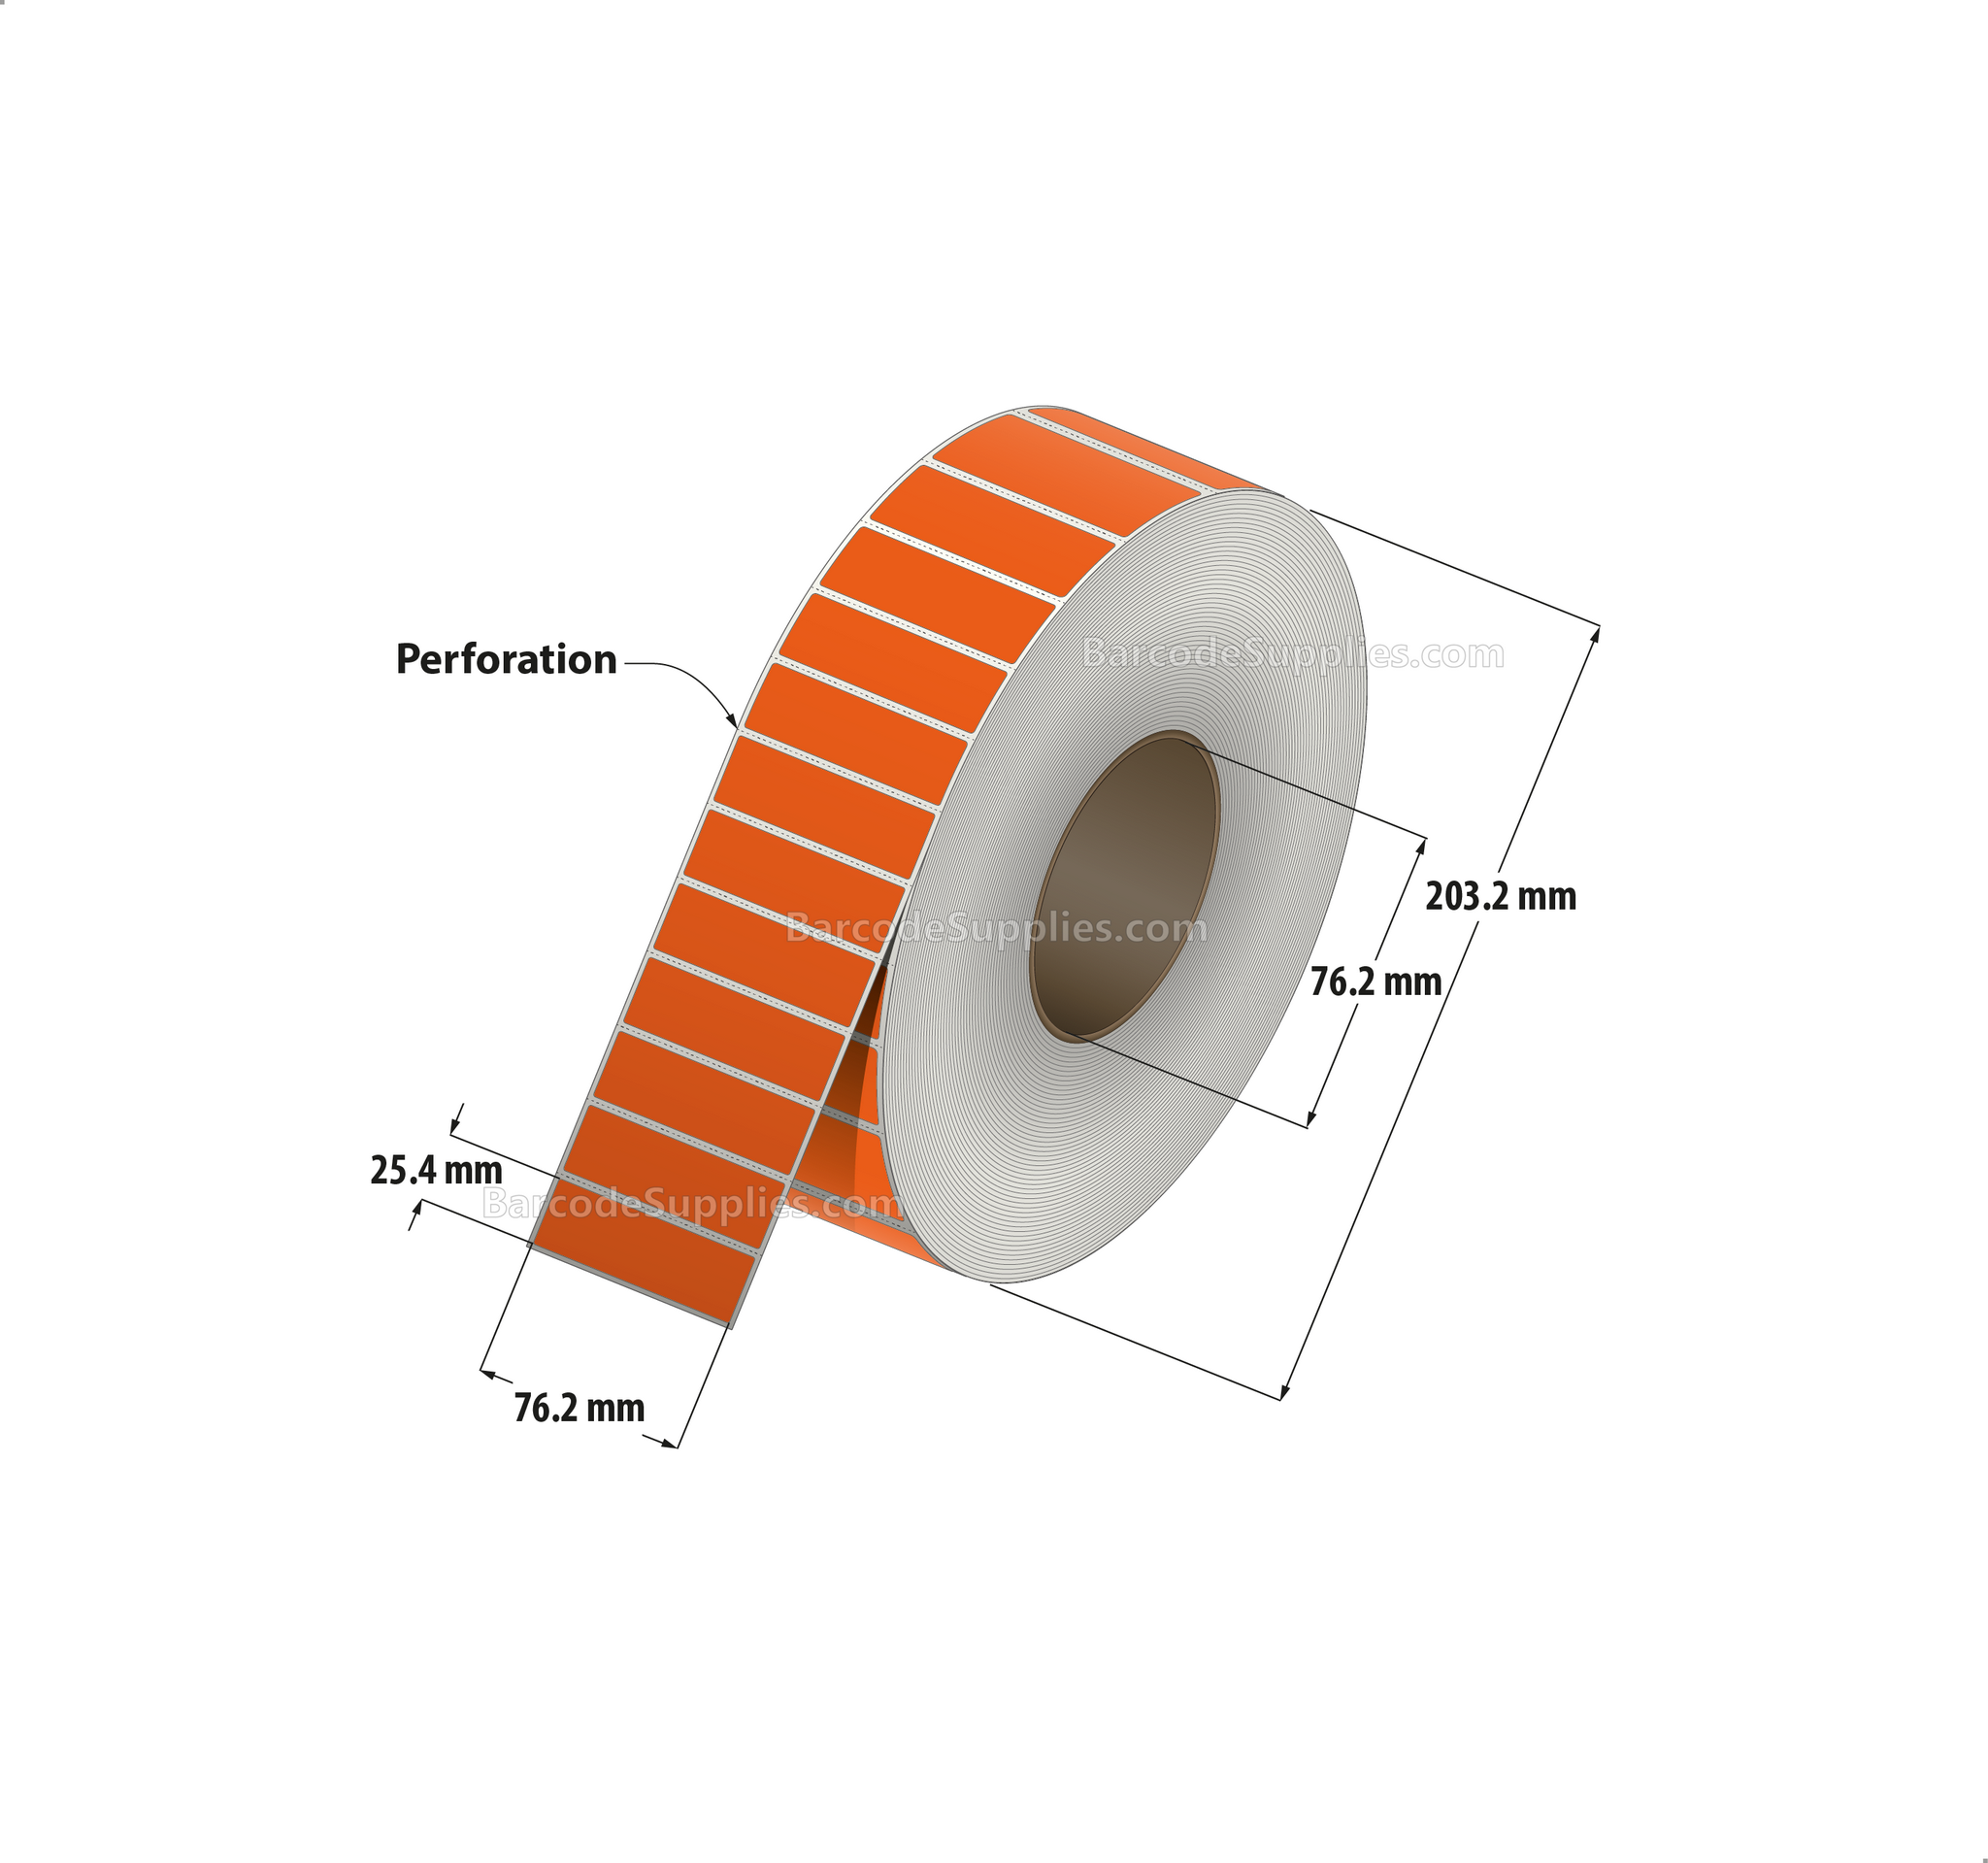 3 x 1 Thermal Transfer 1495 Orange Labels With Permanent Adhesive - Perforated - 5500 Labels Per Roll - Carton Of 8 Rolls - 44000 Labels Total - MPN: RFC-3-1-5500-OR